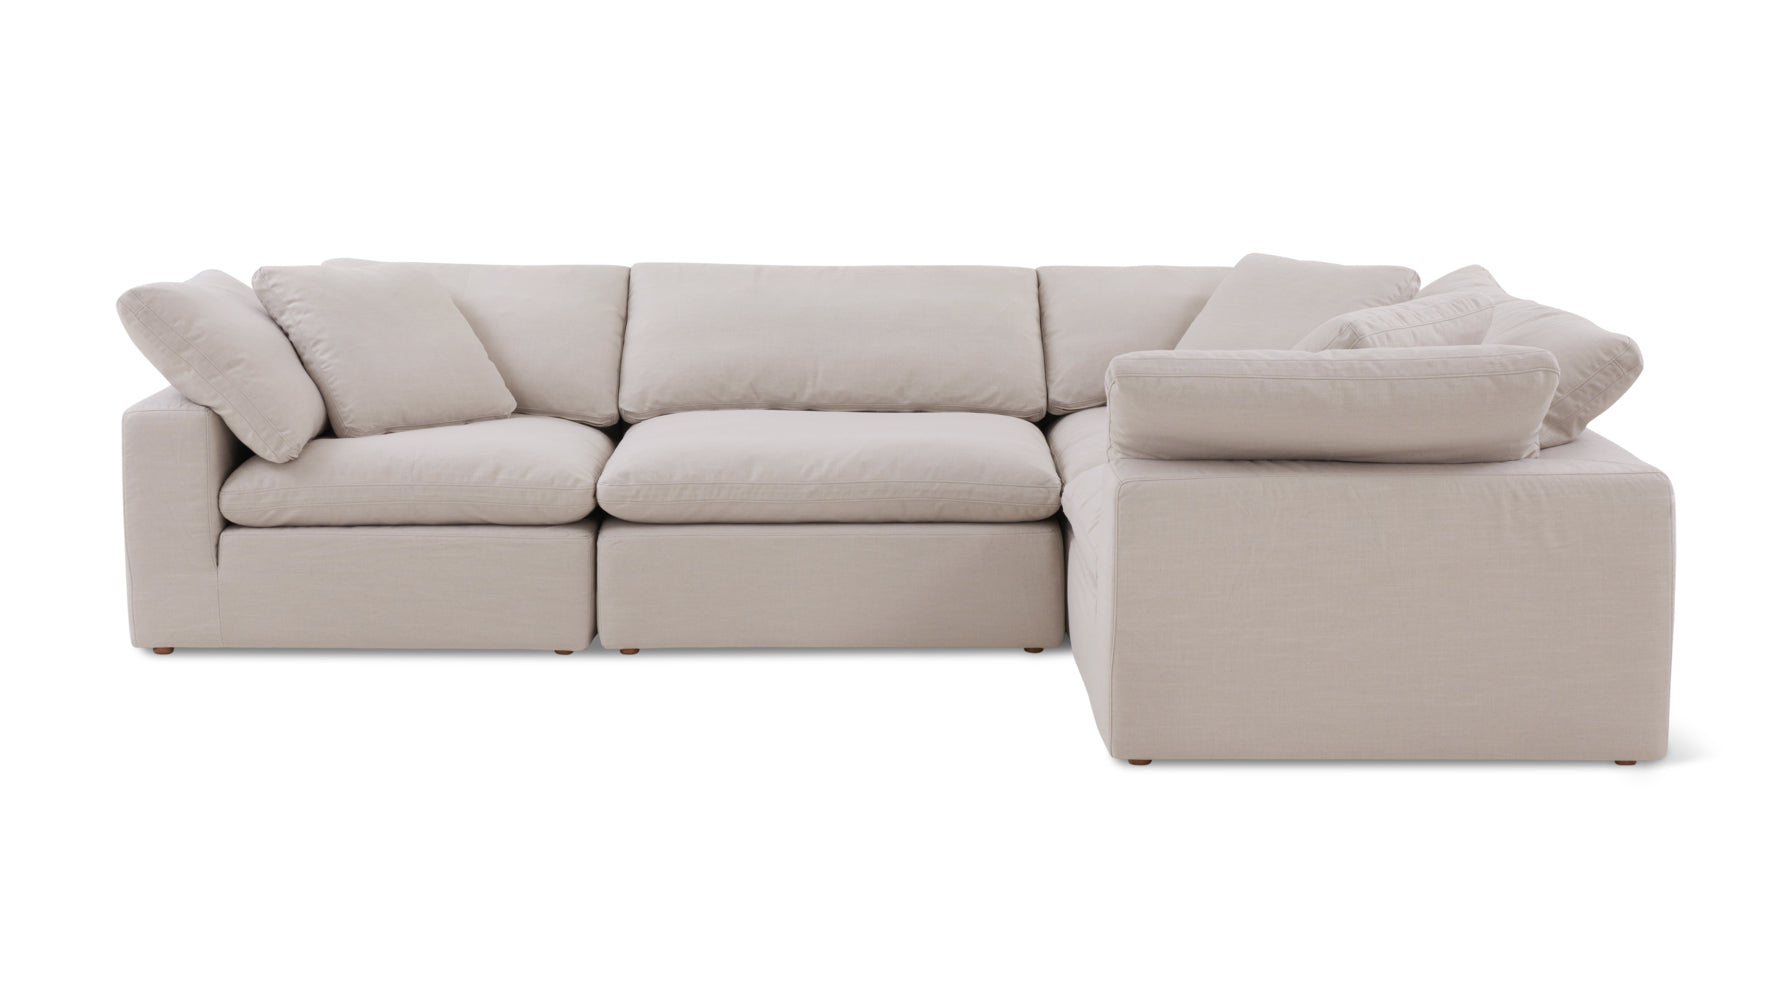 Movie Night™ 4-Piece Modular Sectional Closed, Standard, Clay - Image 1